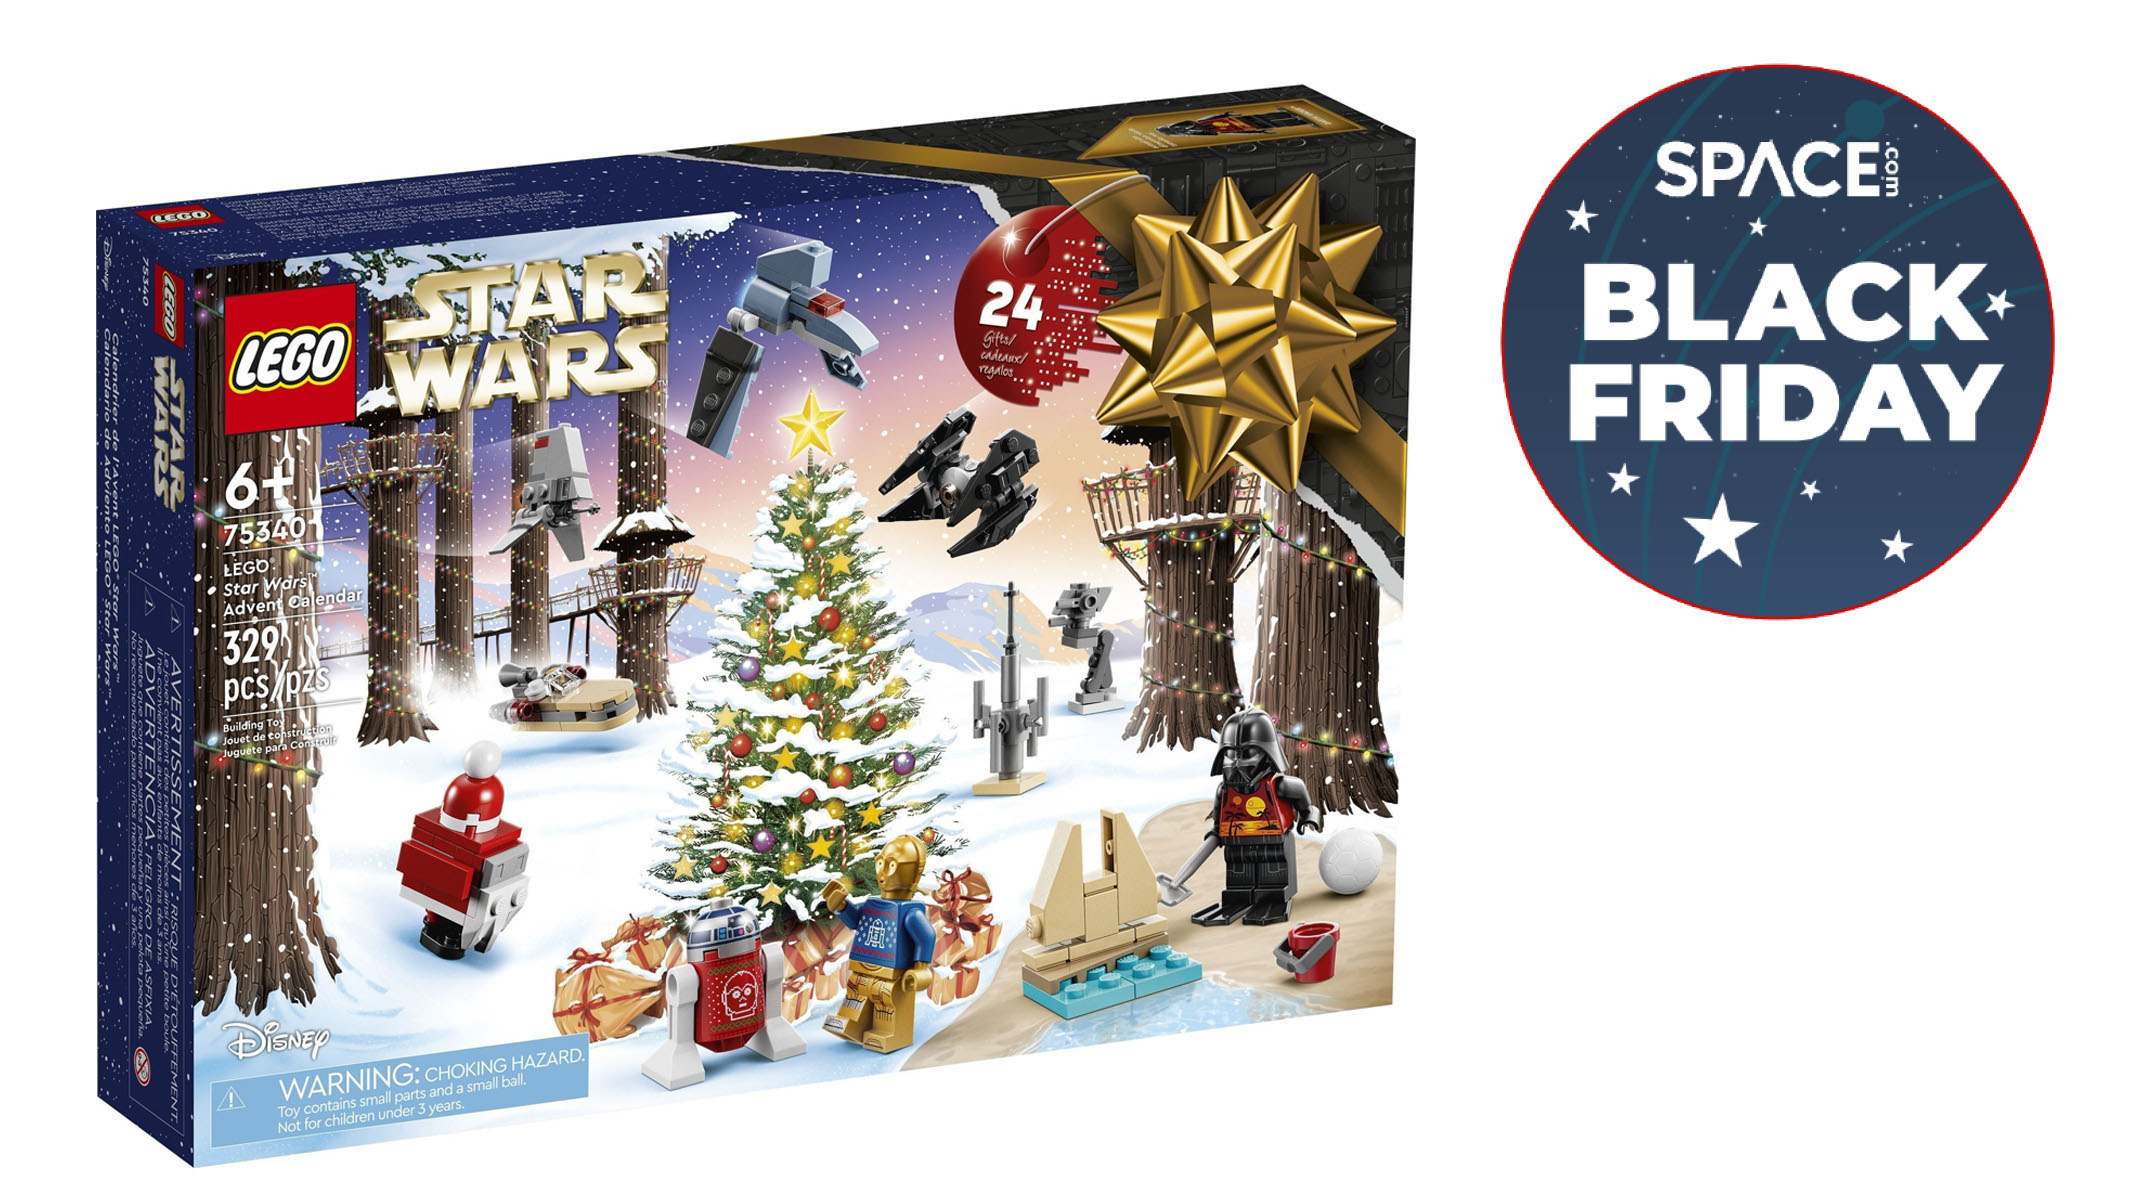 This Lego Star Wars Advent Calendar is 30% off for Black Friday Space